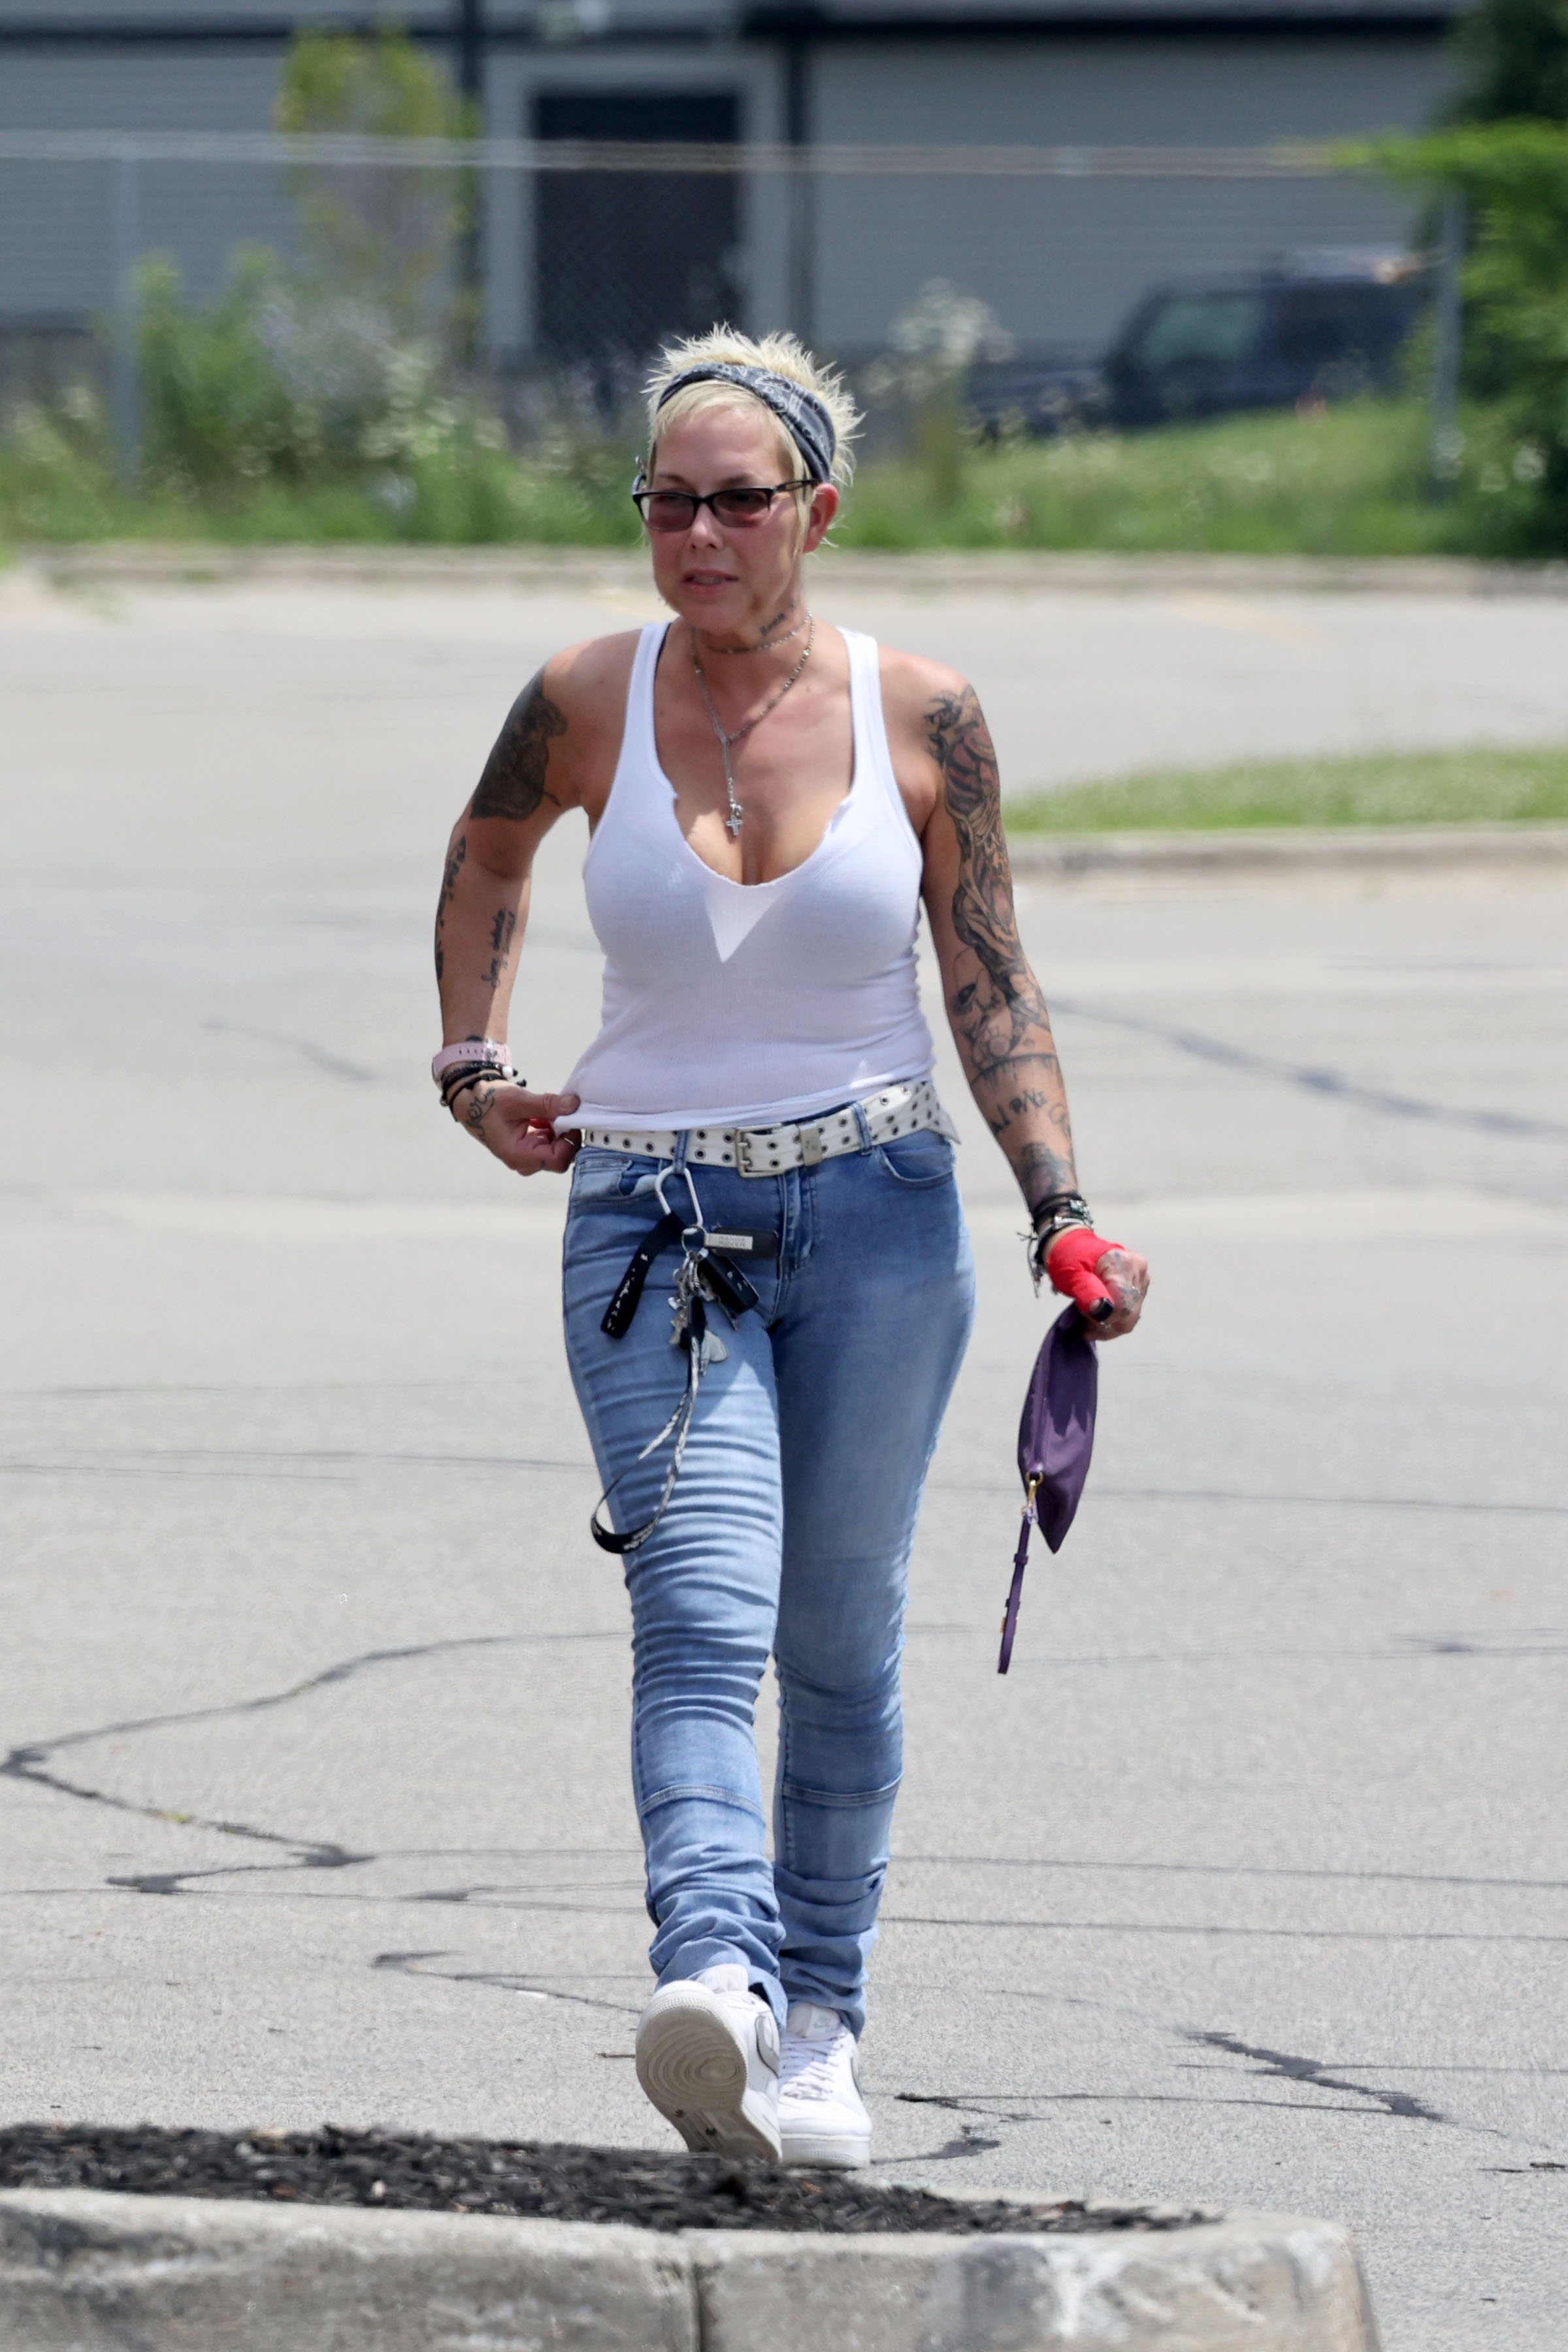 Kim Mathers visited the DMV before her siesta, according to an eyewitness in Michigan